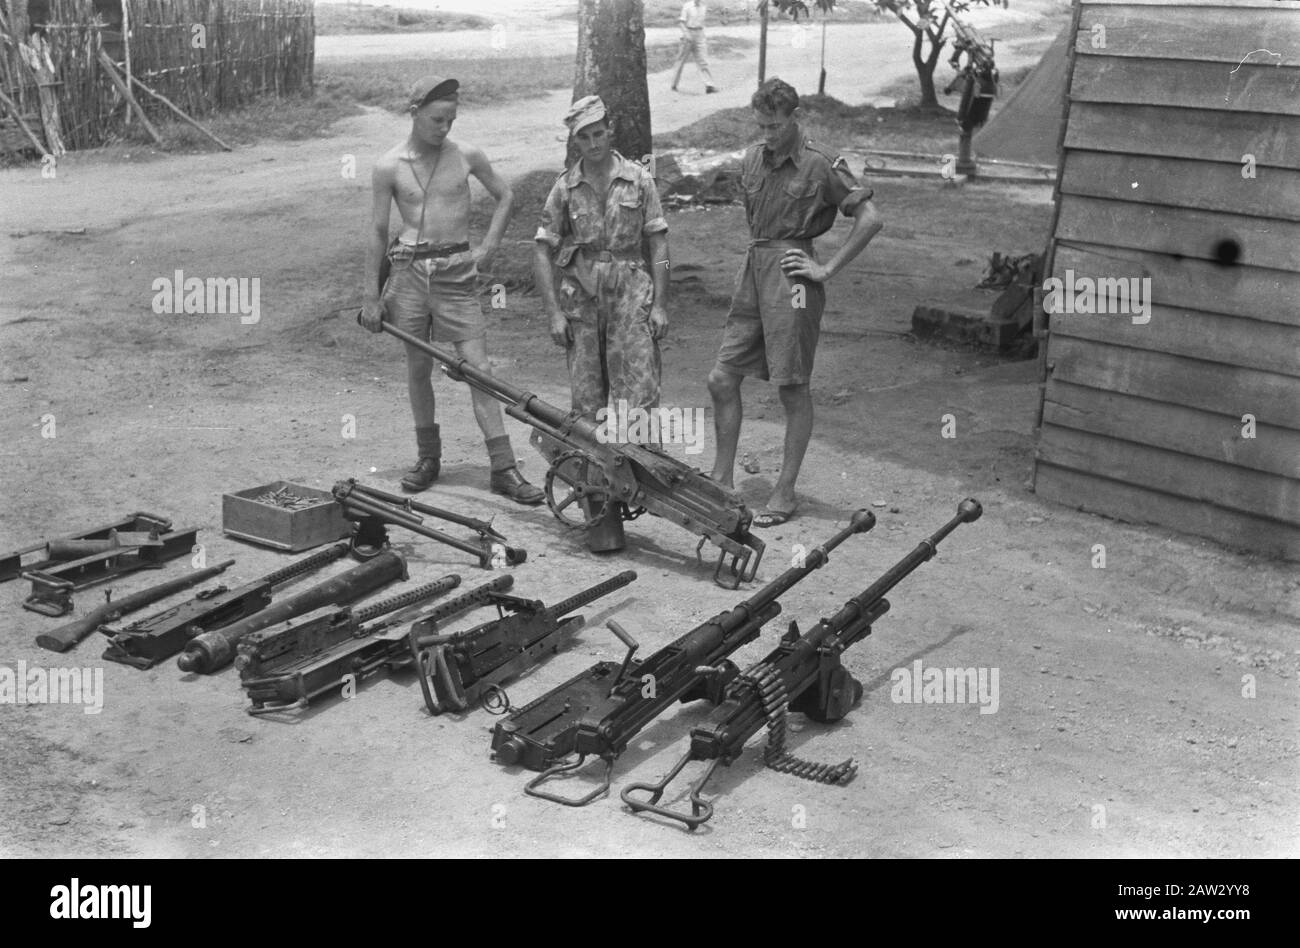 Booty Captured weapons Praboemoelih  Praboemoelih: Sergeant. G. H. Smeets of K.N.I.L. (Gadja Merah) and second husband of seven R.S. standing proudly looking at the weapons detected by them. Date: October 26, 1947 Location: Indonesia, Dutch East Indies, Prabumulih, Sumatra Stock Photo